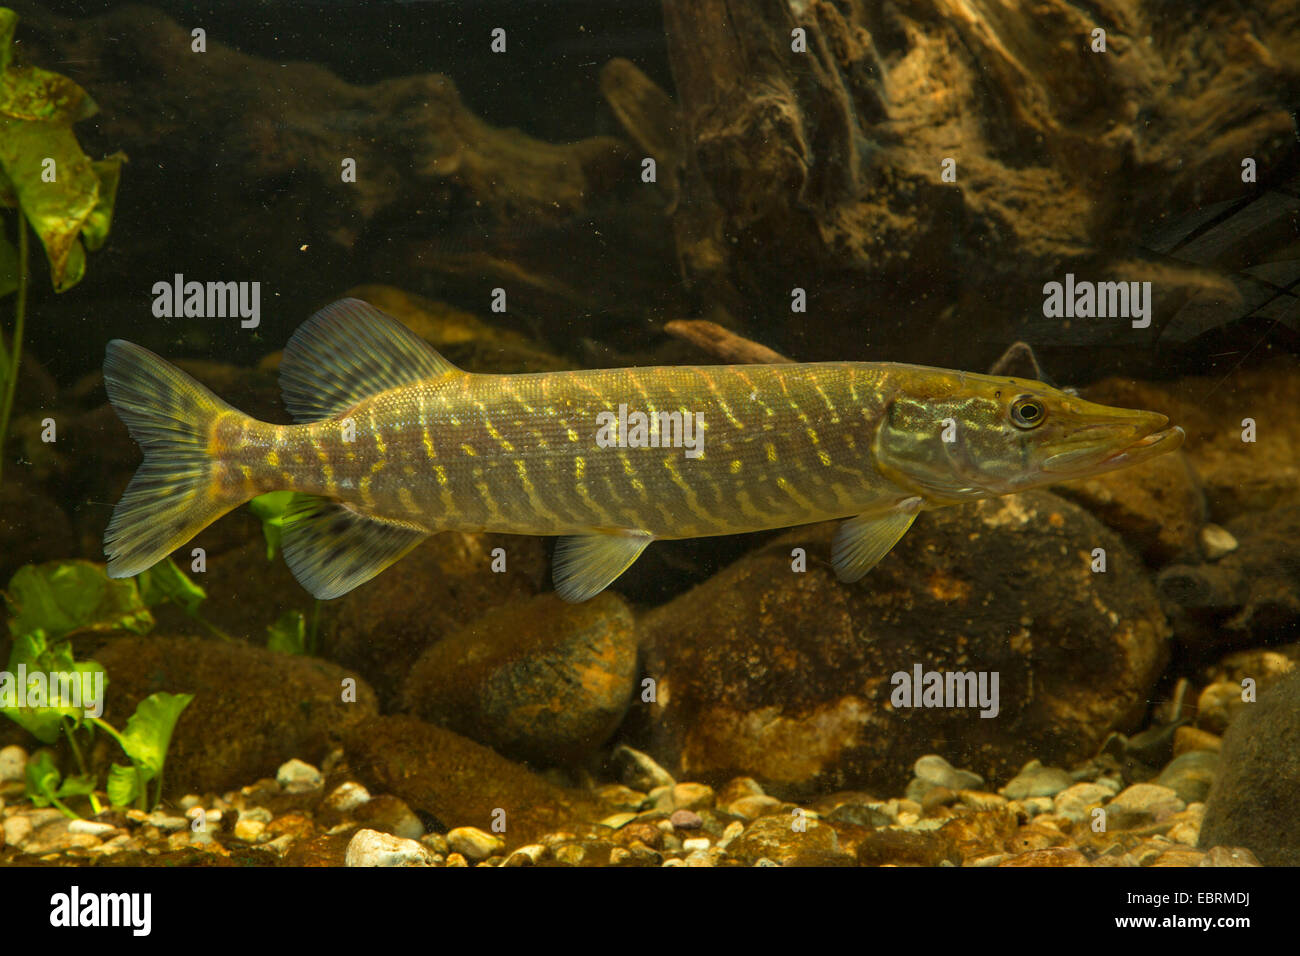 pike, northern pike (Esox lucius), swimming Stock Photo